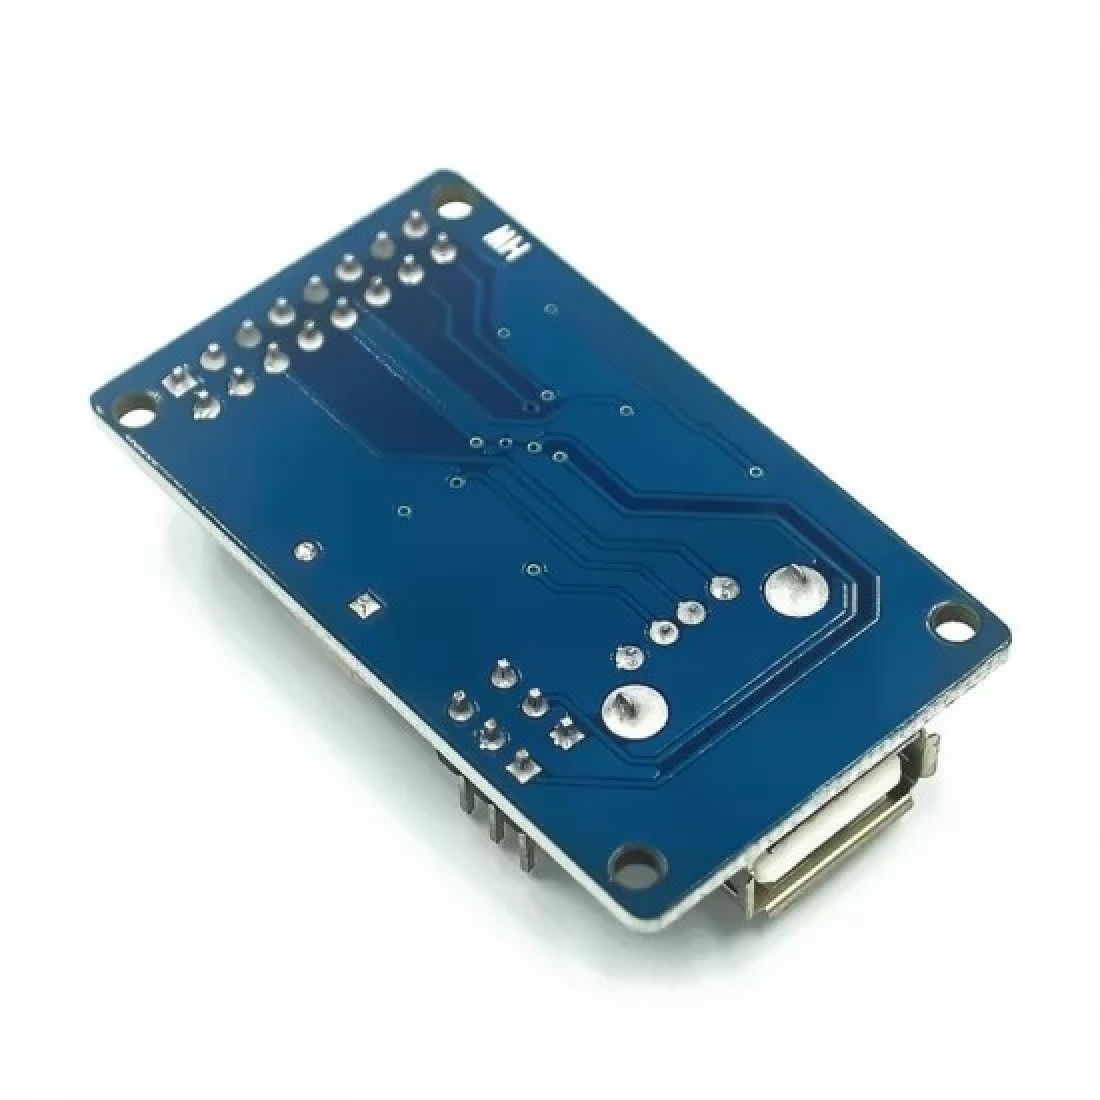 Buy Ch376s Usb Disk Read Write Module Online In India At 0475